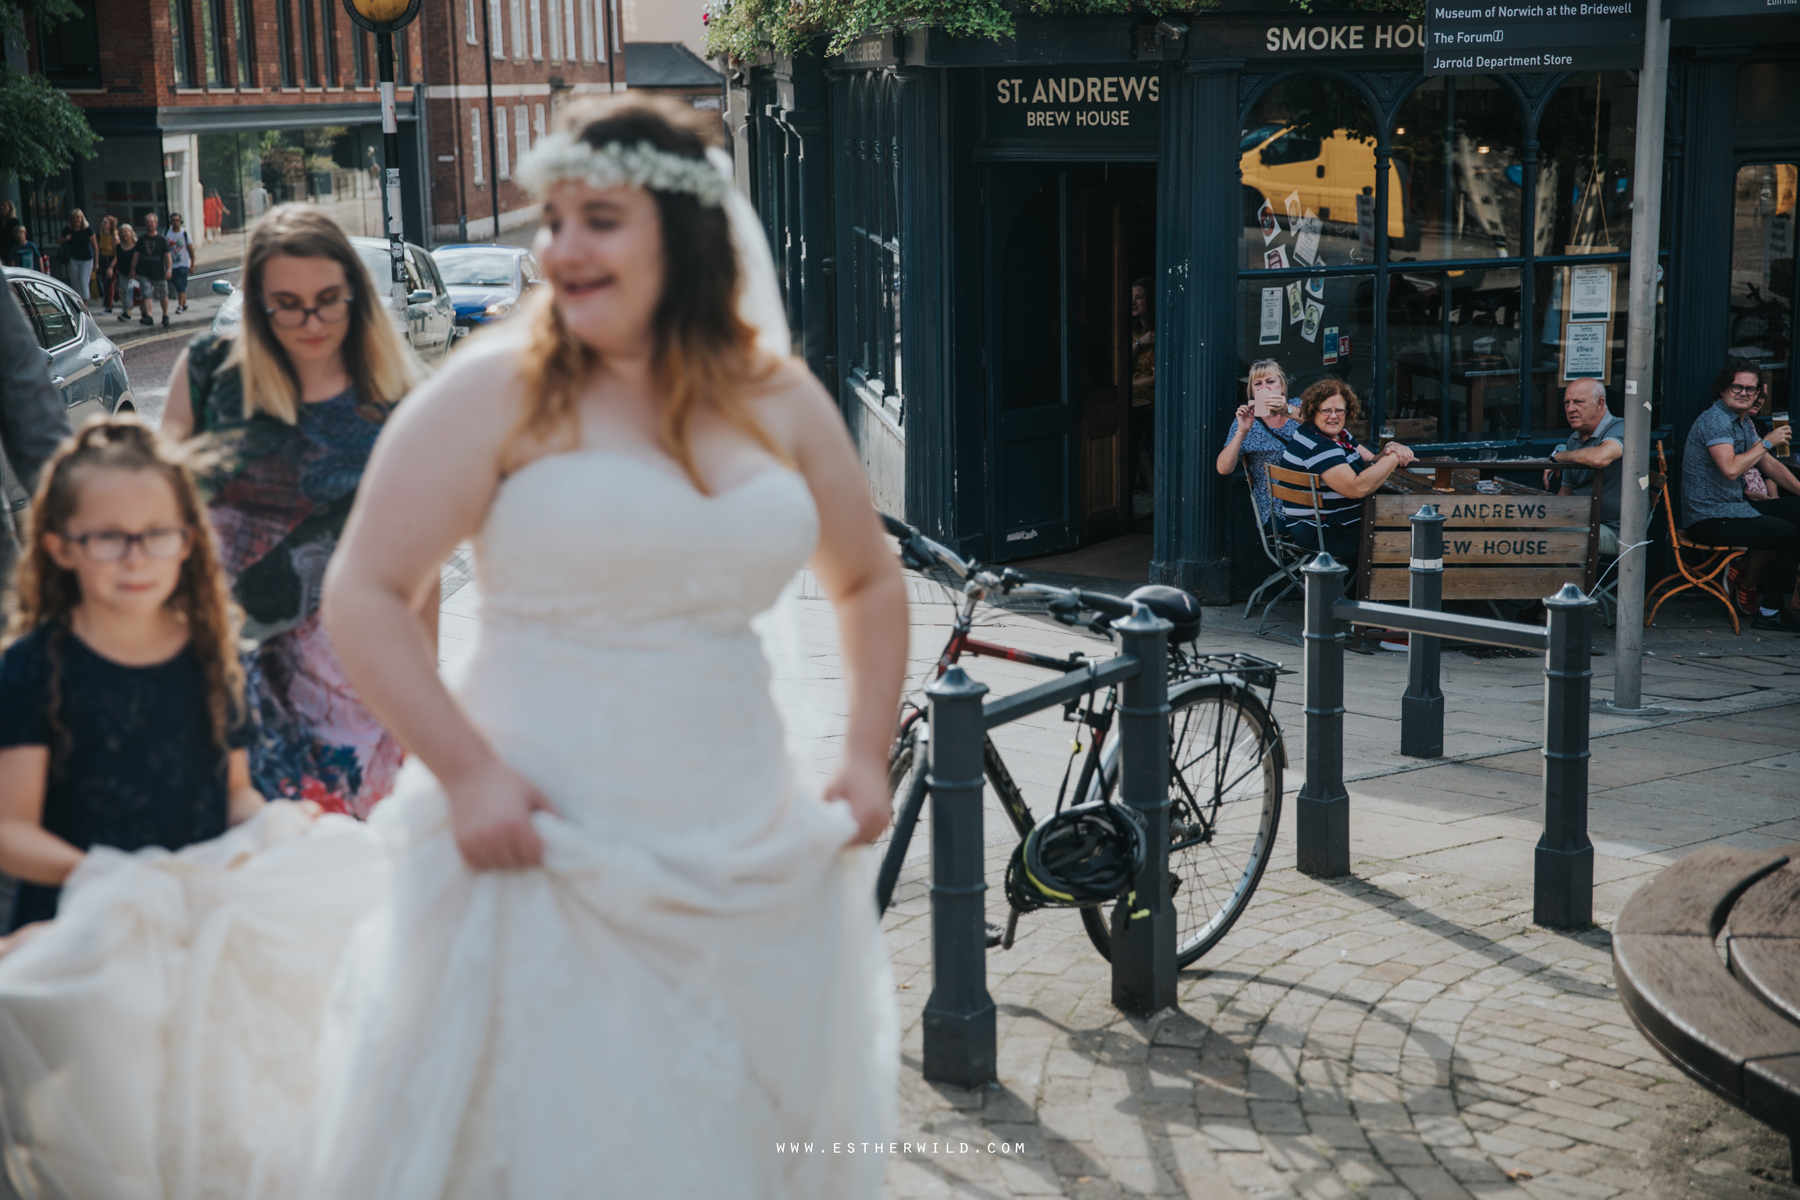 Norwich_Castle_Arcade_Grosvenor_Chip_Birdcage_Cathedral_Cloisters_Refectory_Wedding_Photography_Esther_Wild_Photographer_Norfolk_Kings_Lynn_3R8A1769.jpg